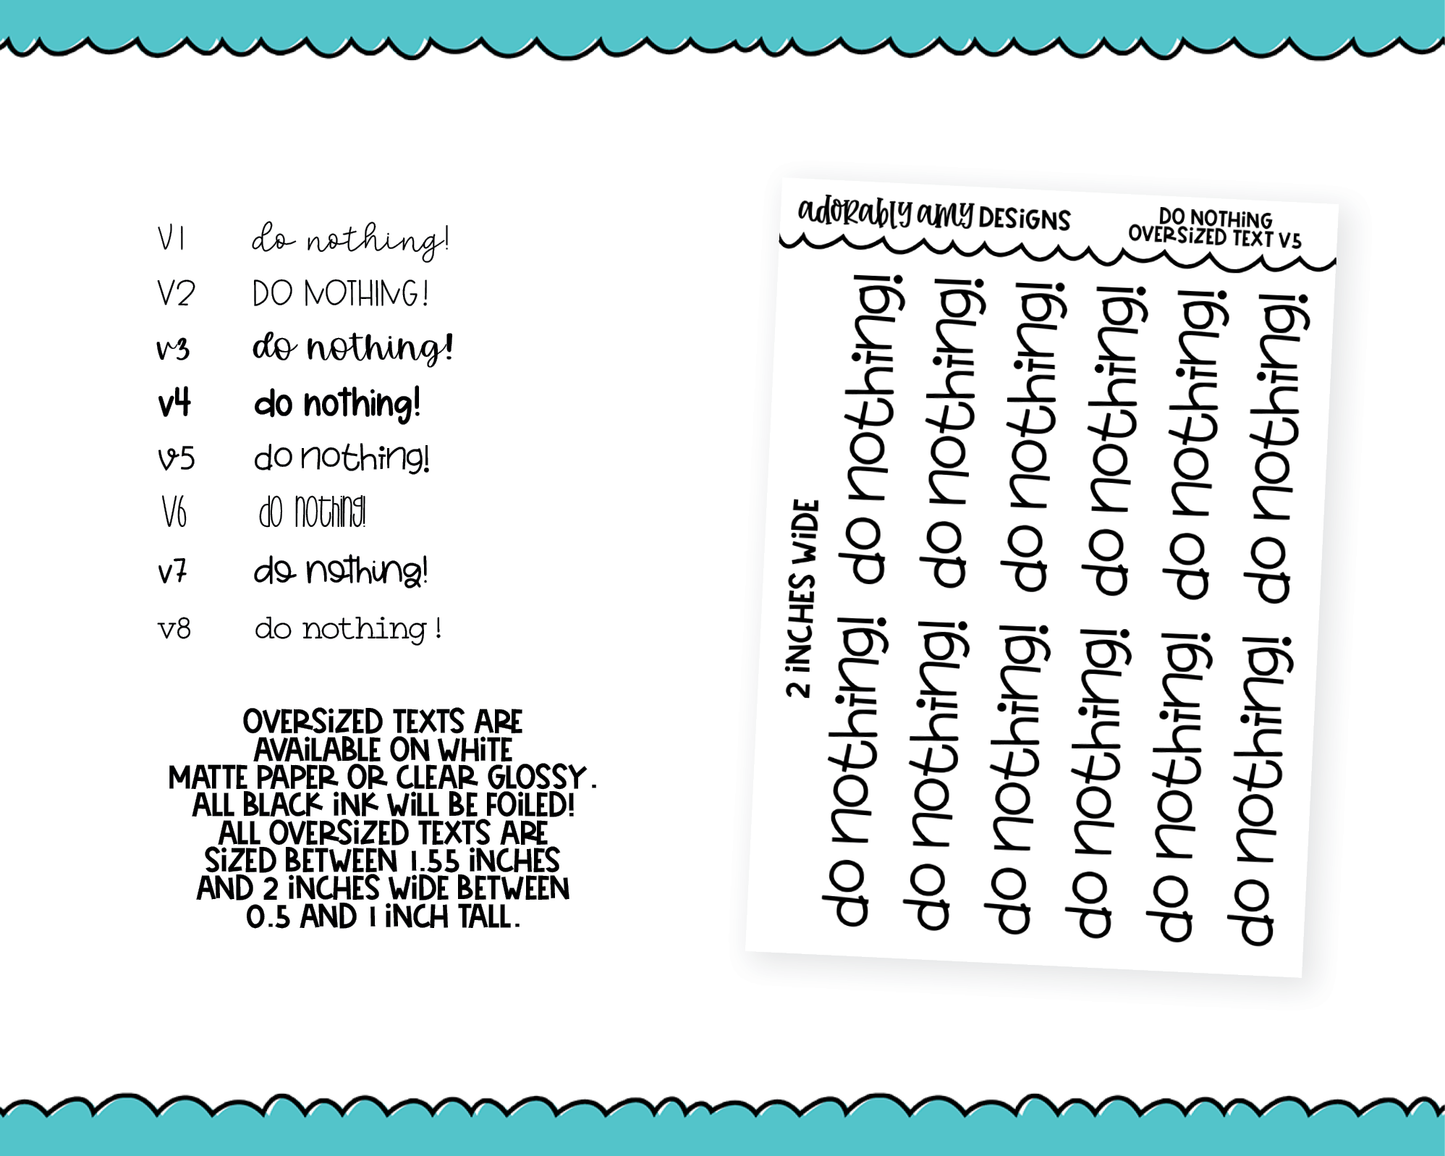 Foiled Oversized Text - Do Nothing Large Text Planner Stickers